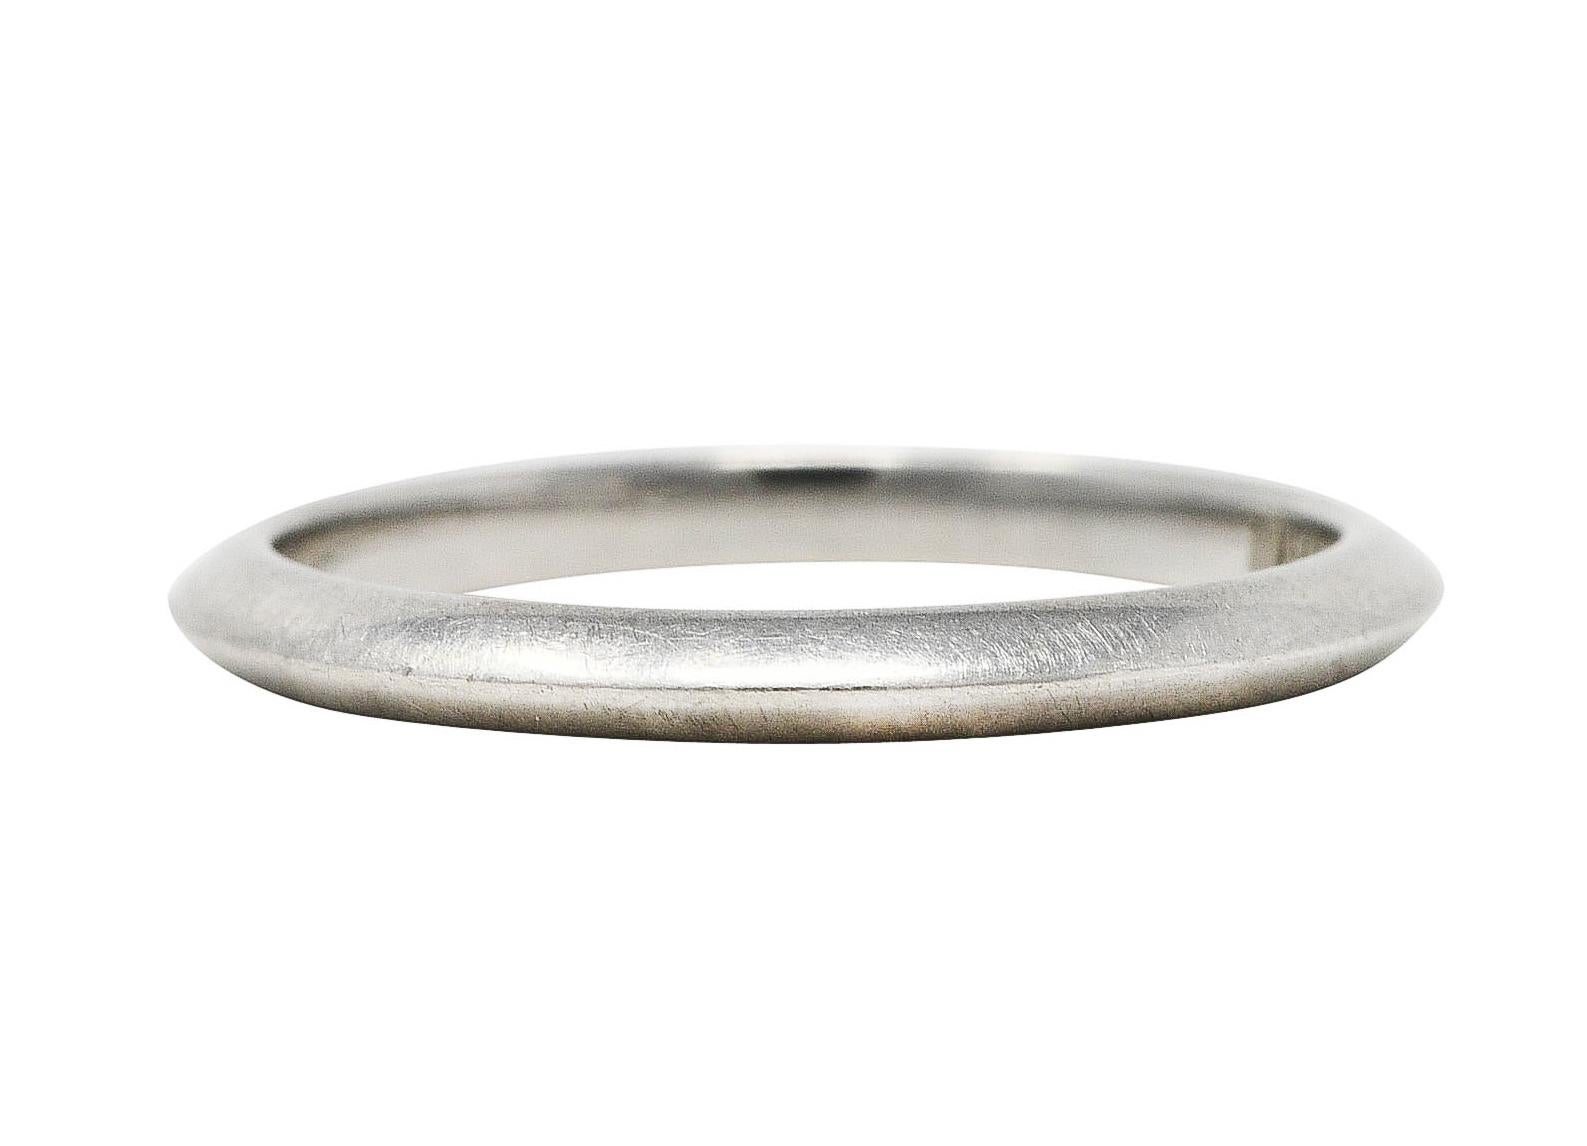 Band style ring designed with knife edge detailing

Featuring high polished finish

Stamped PT950 for platinum

Fully signed Tiffany & Co.

Circa: 2000's

Ring size: 4.5 and not sizable

Measures North to South 2.0 mm and sits 1.5 mm high

Total